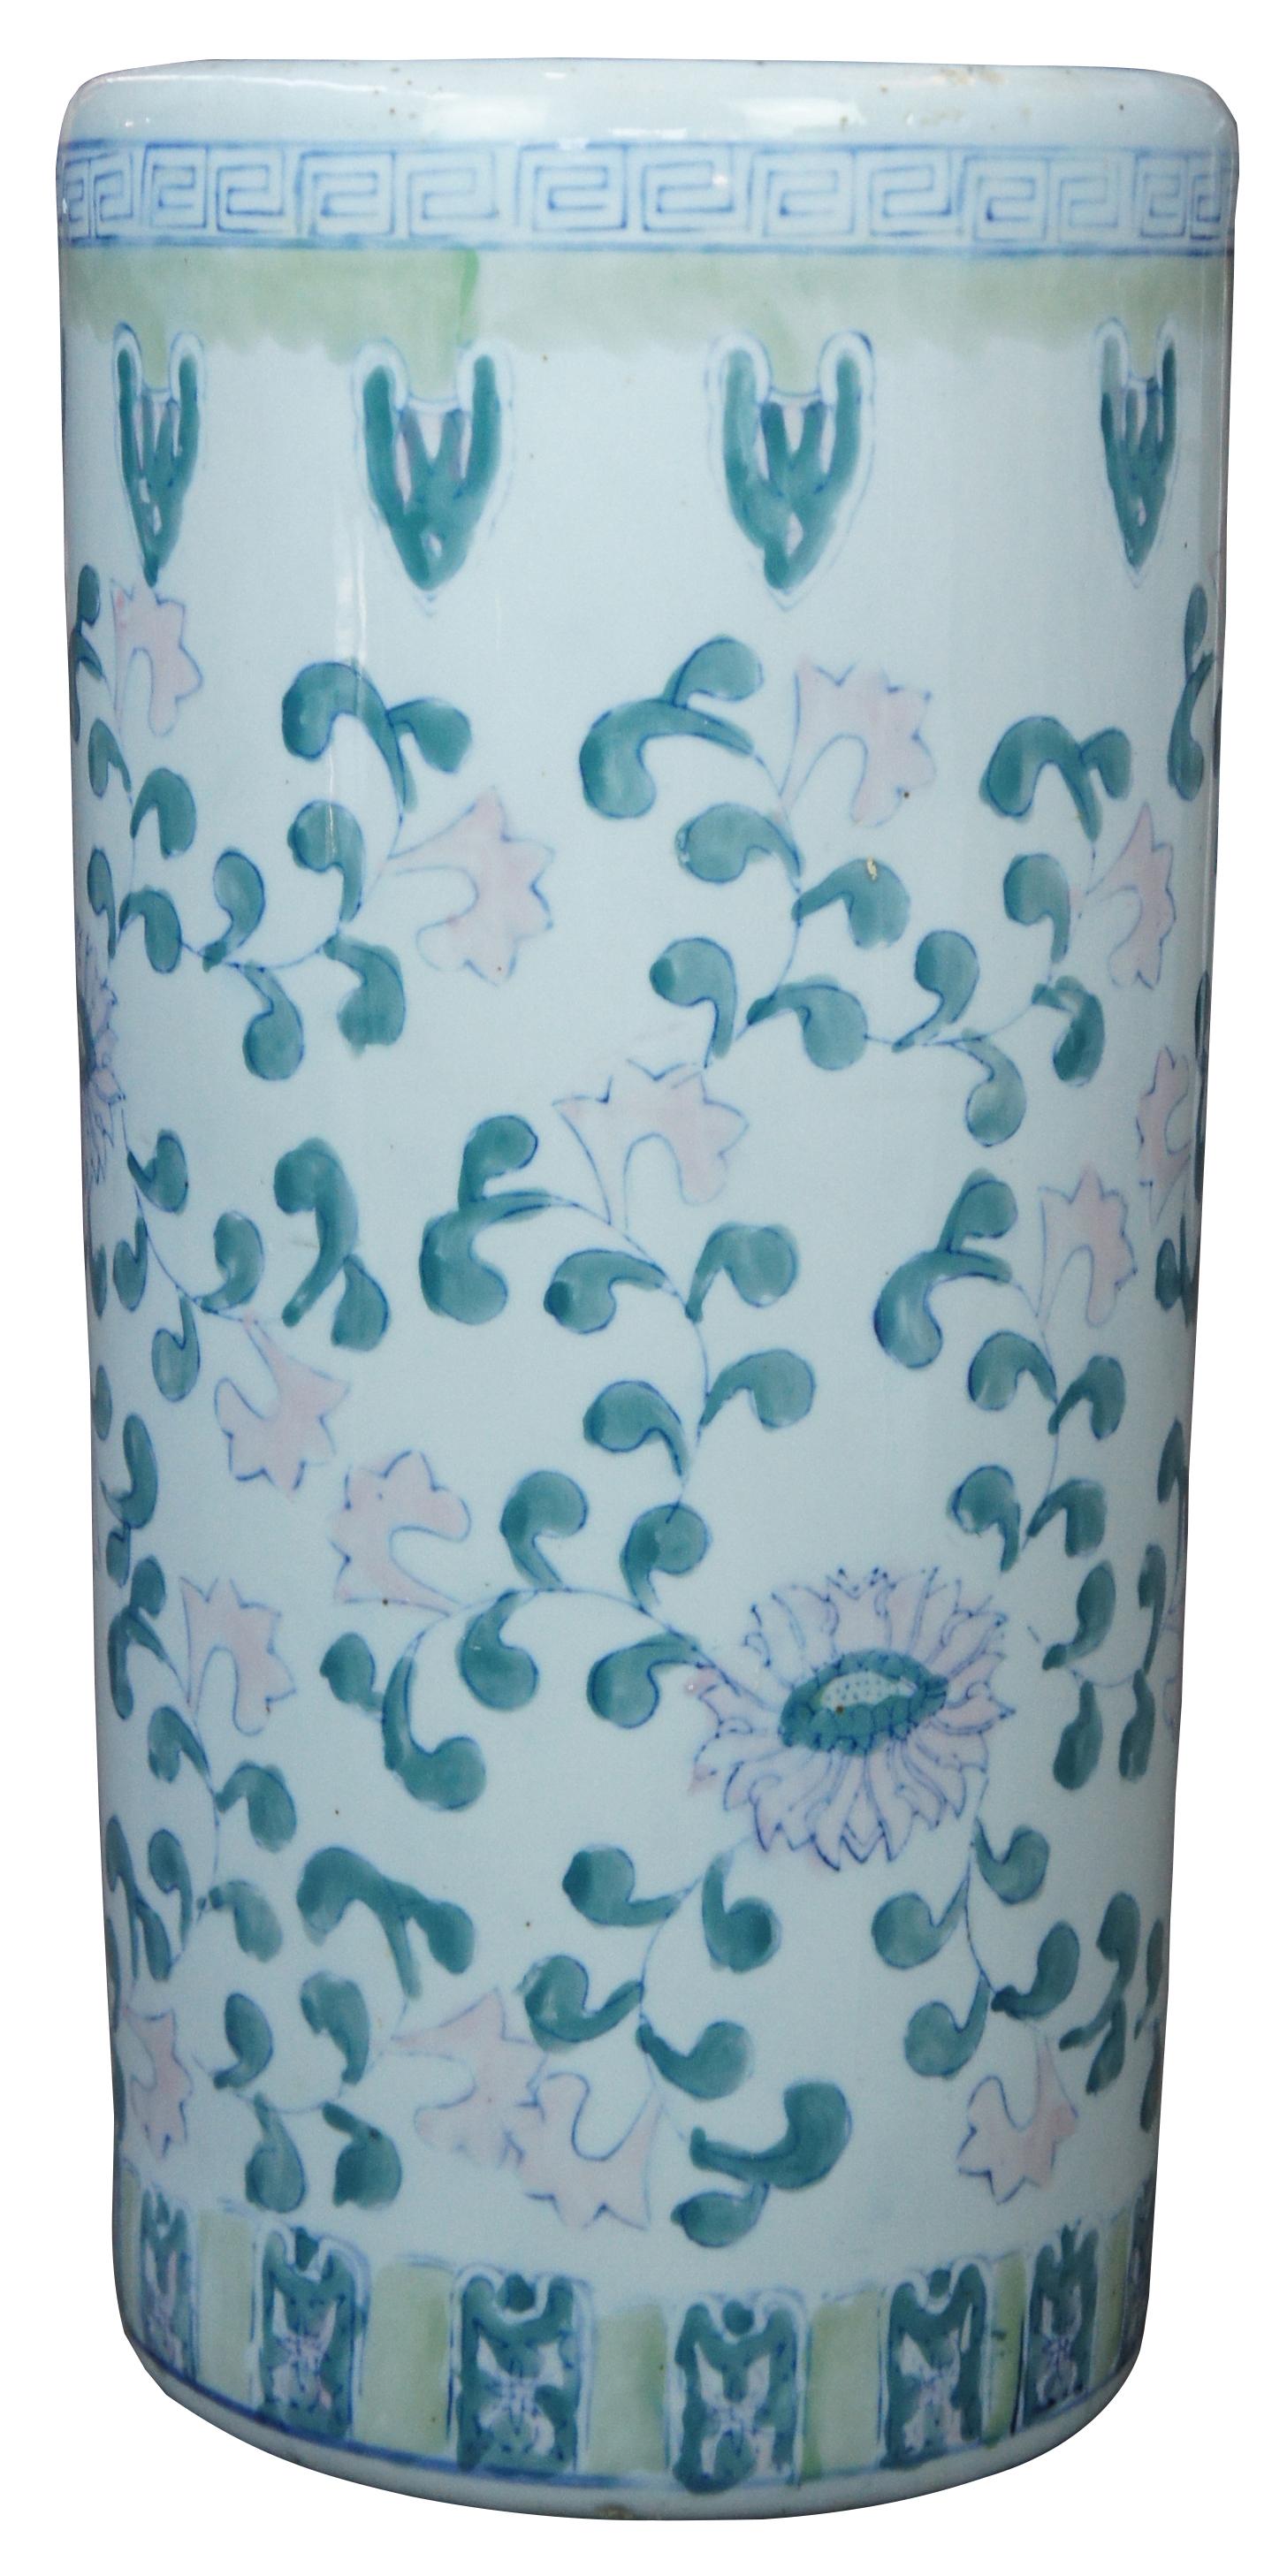 Antique Chinese umbrella stand or cane holder. Made of porcelain featuring hand painted floral and foliate designs in pink, blue, and green, patterned between abstract banding with a Greek key border.  Measures: 18